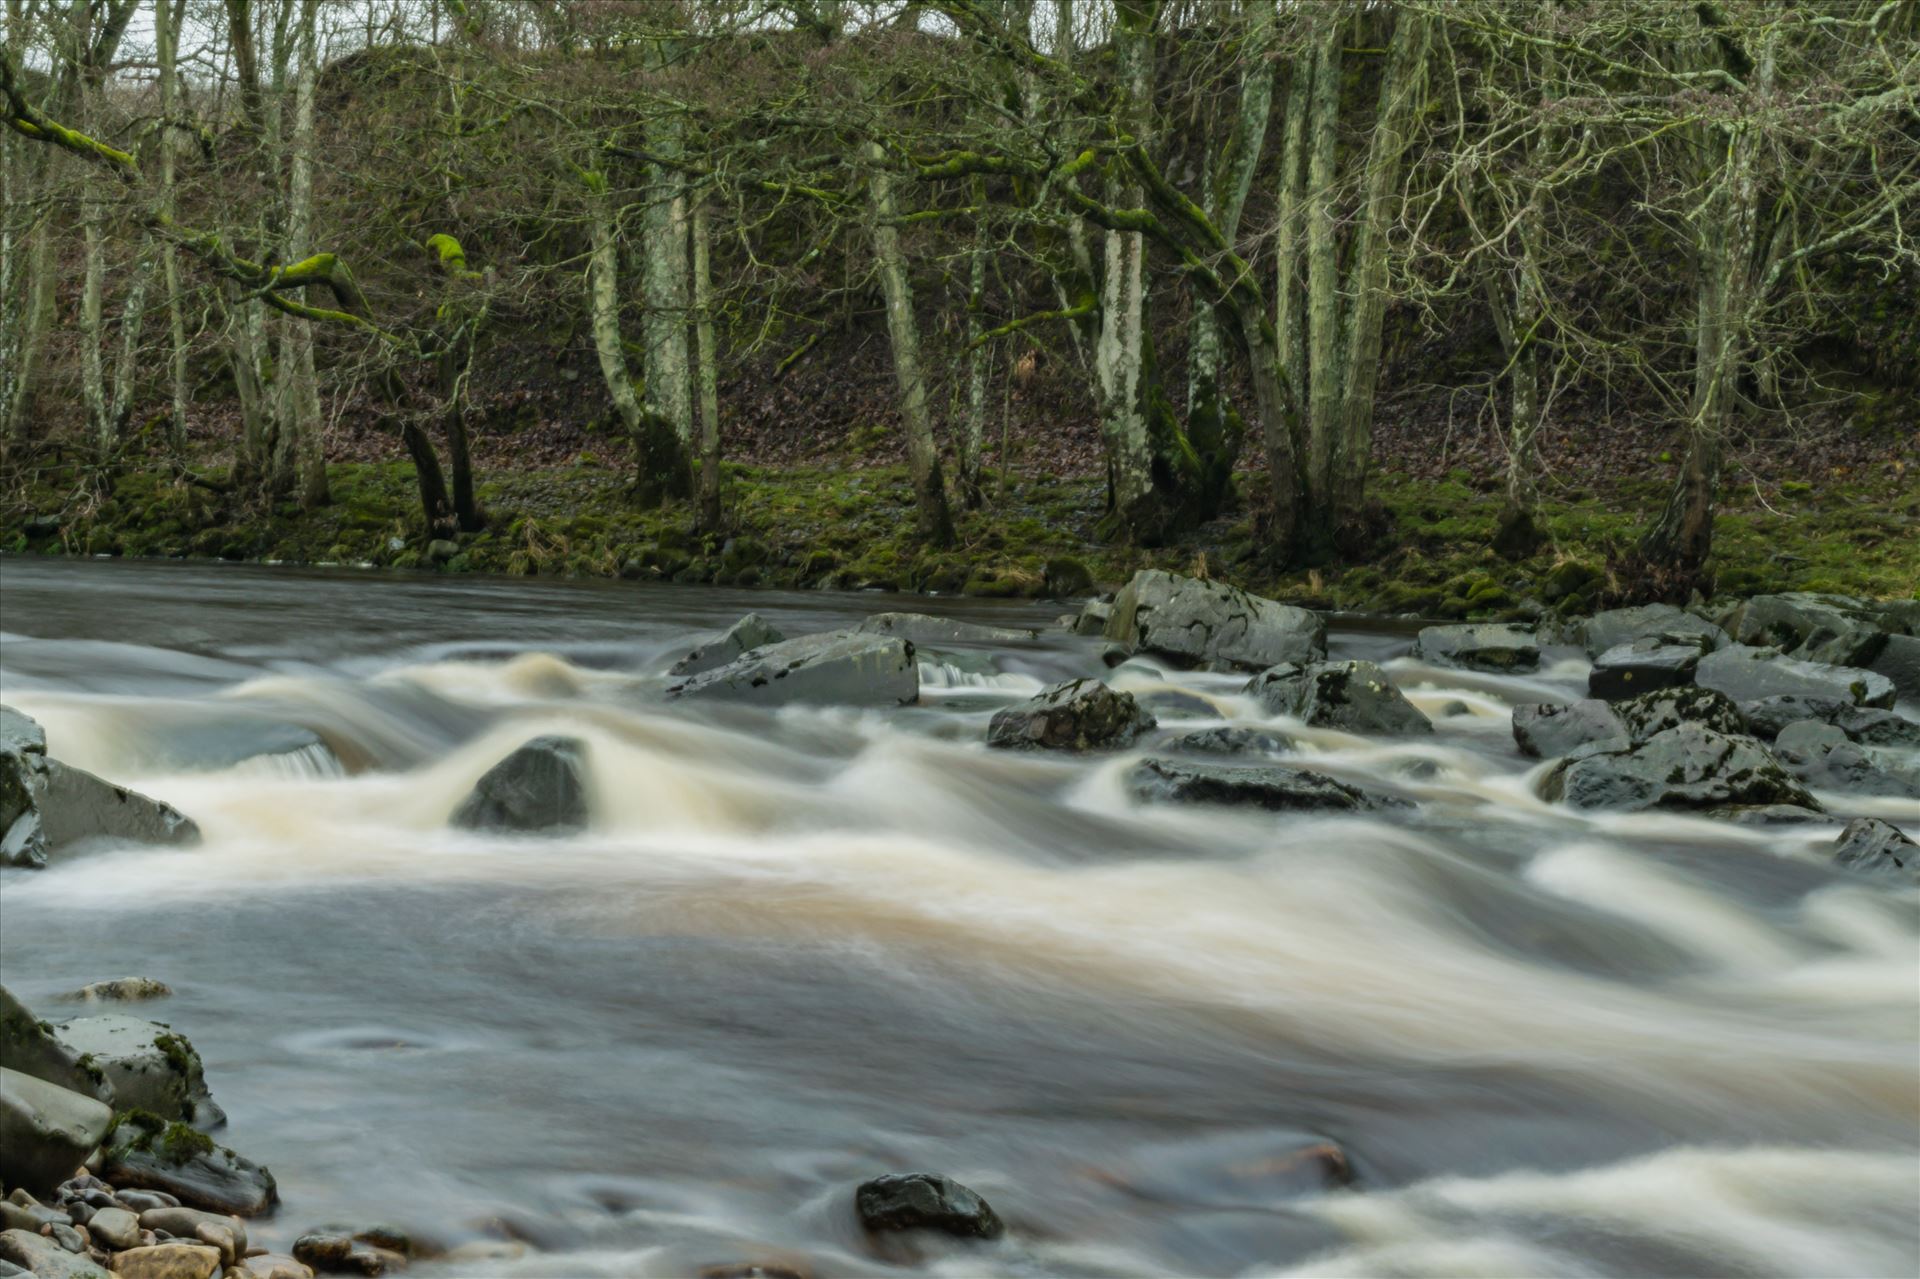 River in Full Flow - A river in full flow, taken with a ND filter and a 15 scoond exposure by AJ Stoves Photography